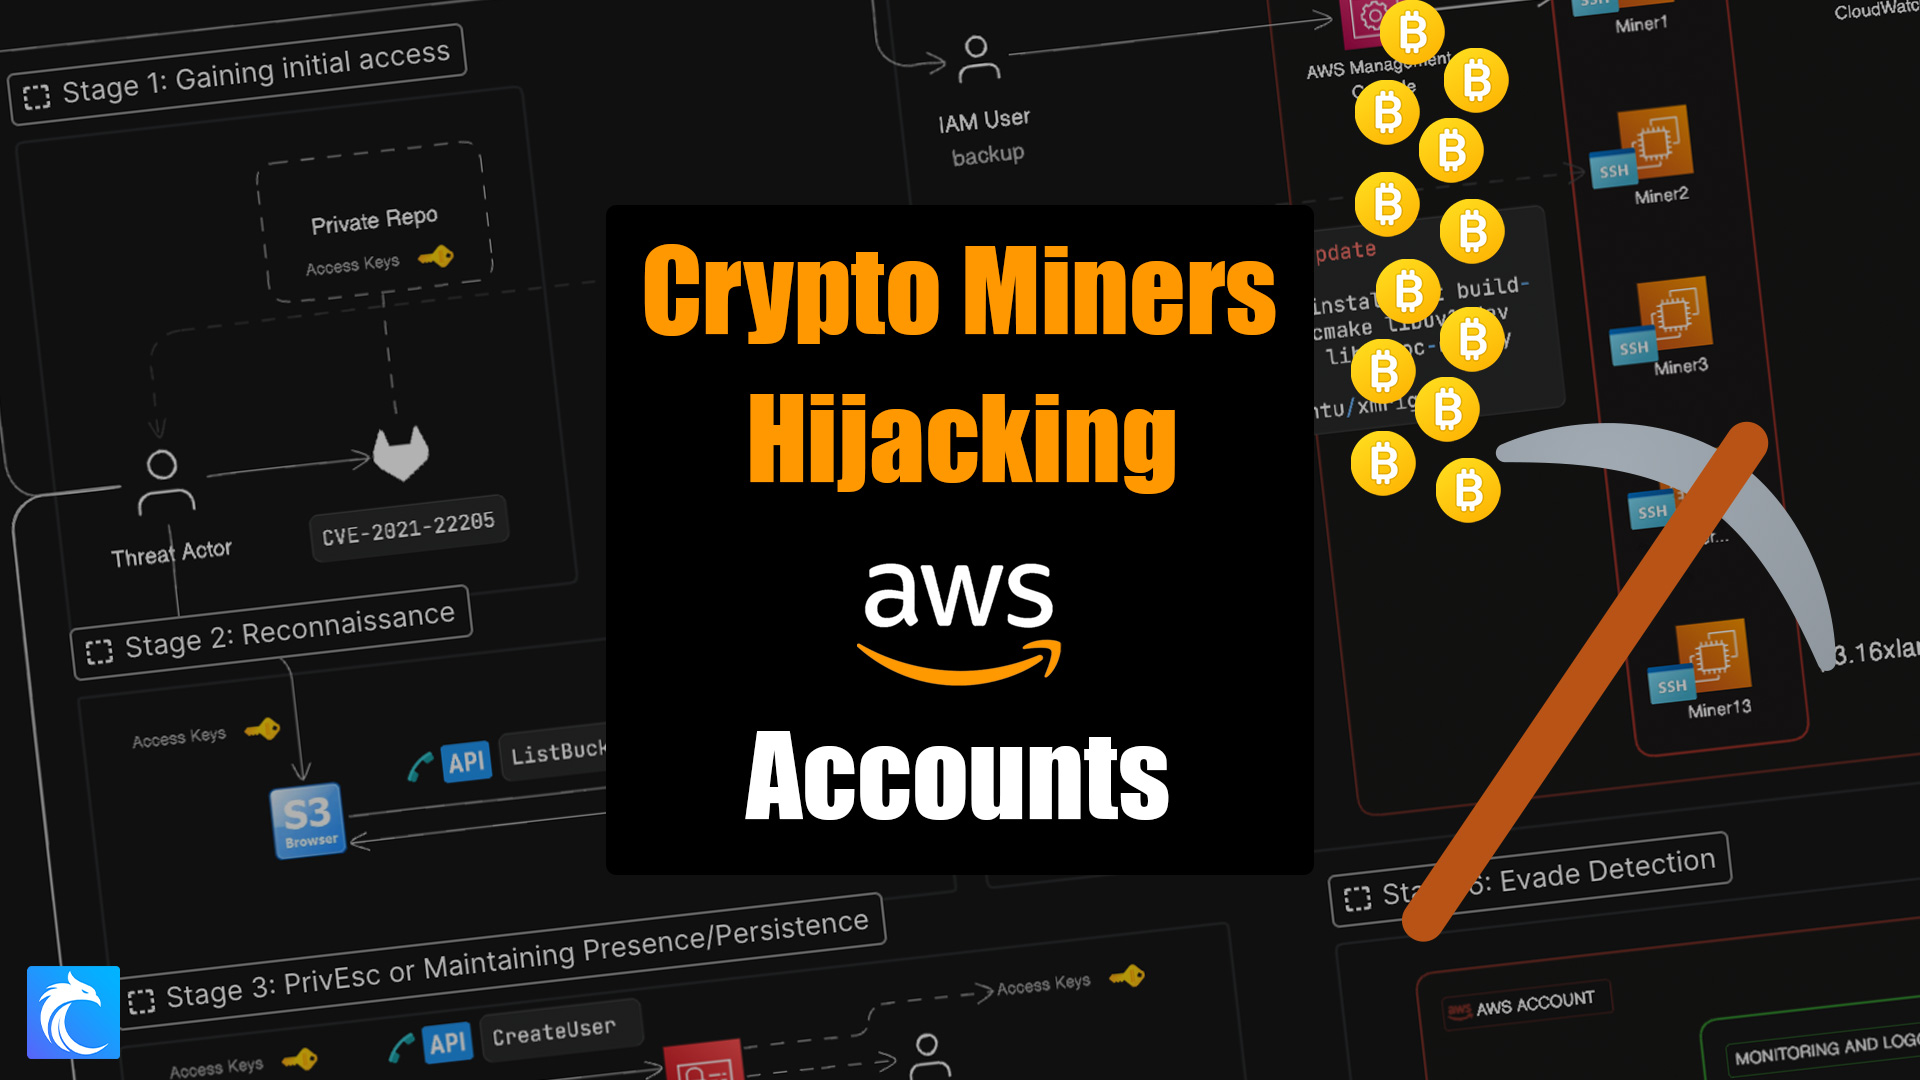 Mining cryptocurrency with AWS | AWS re:Post